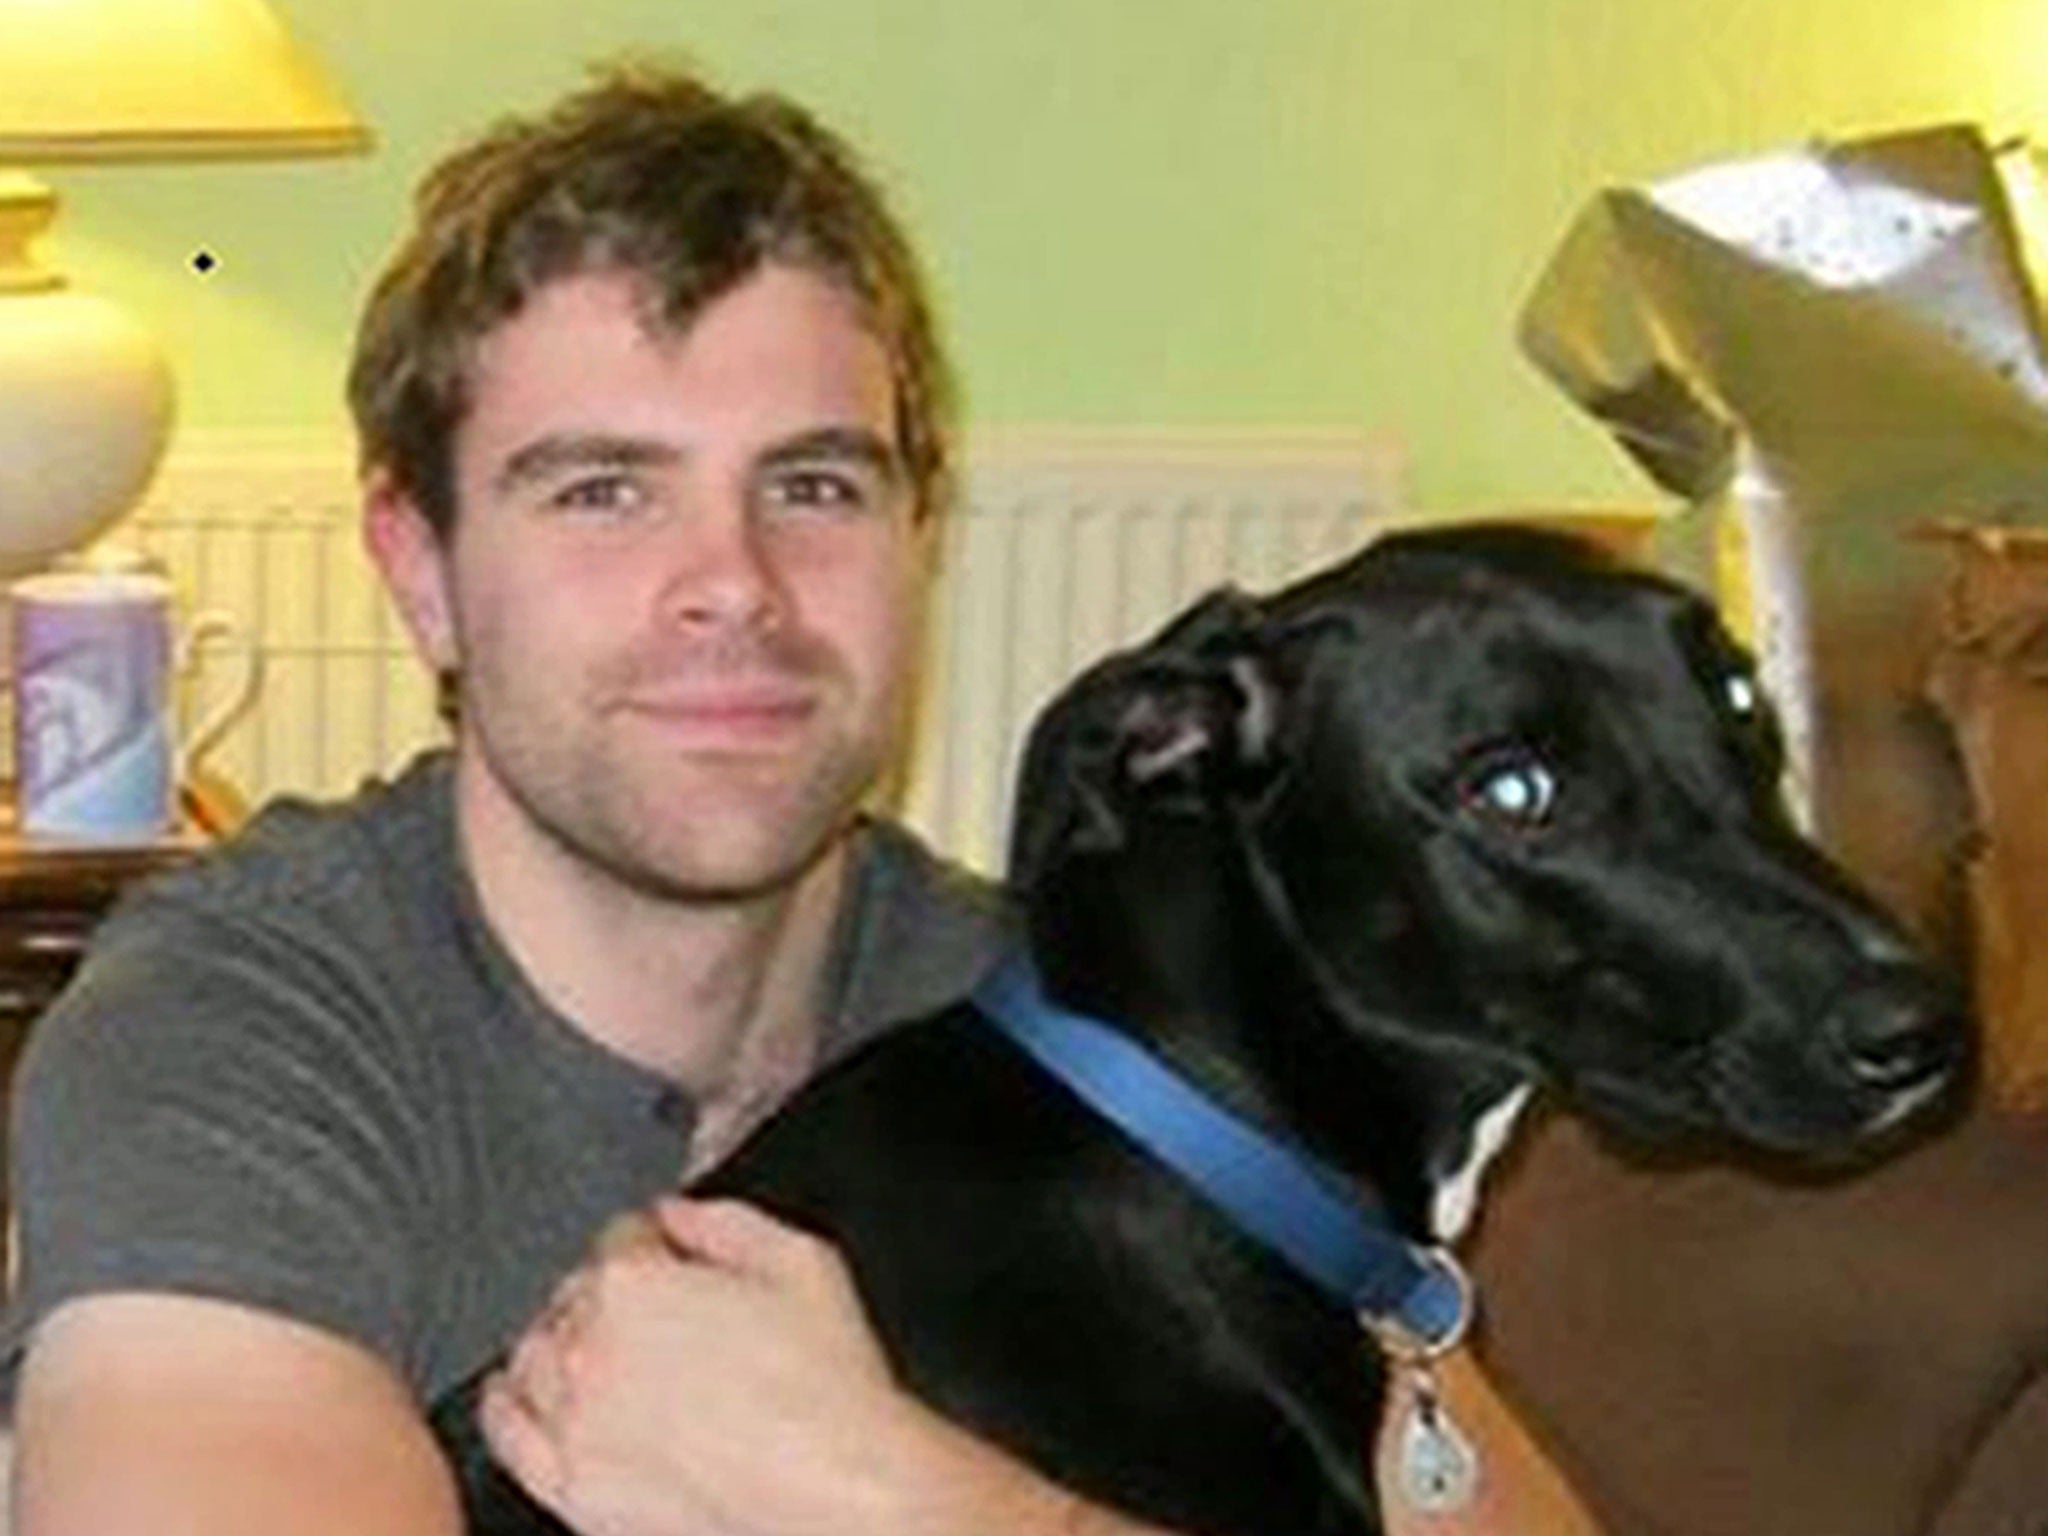 Cameron Logan with his dog, Gomez, who both perished in the blaze